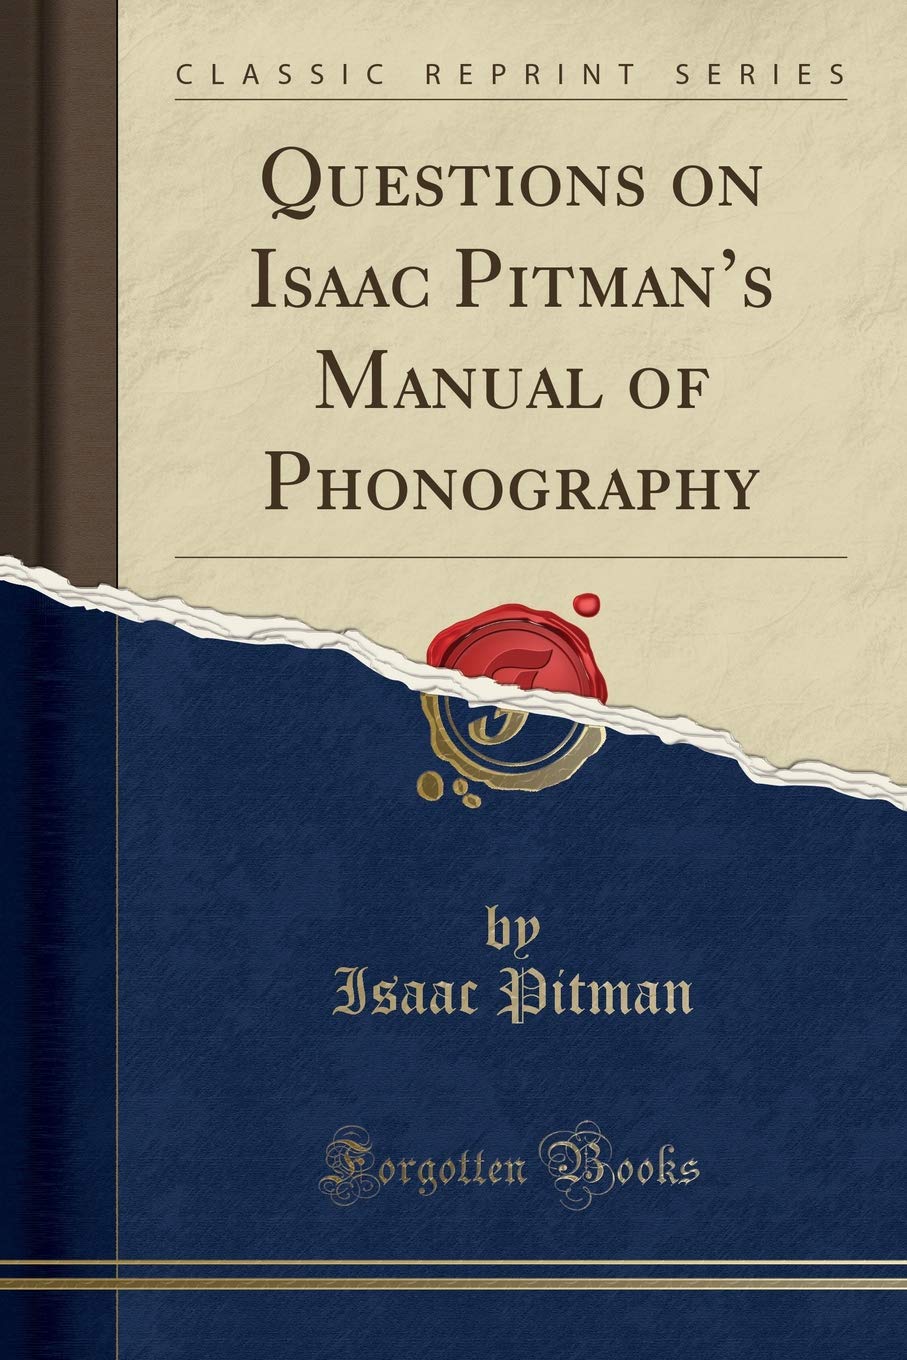 Questions on Isaac Pitman's Manual of Phonography